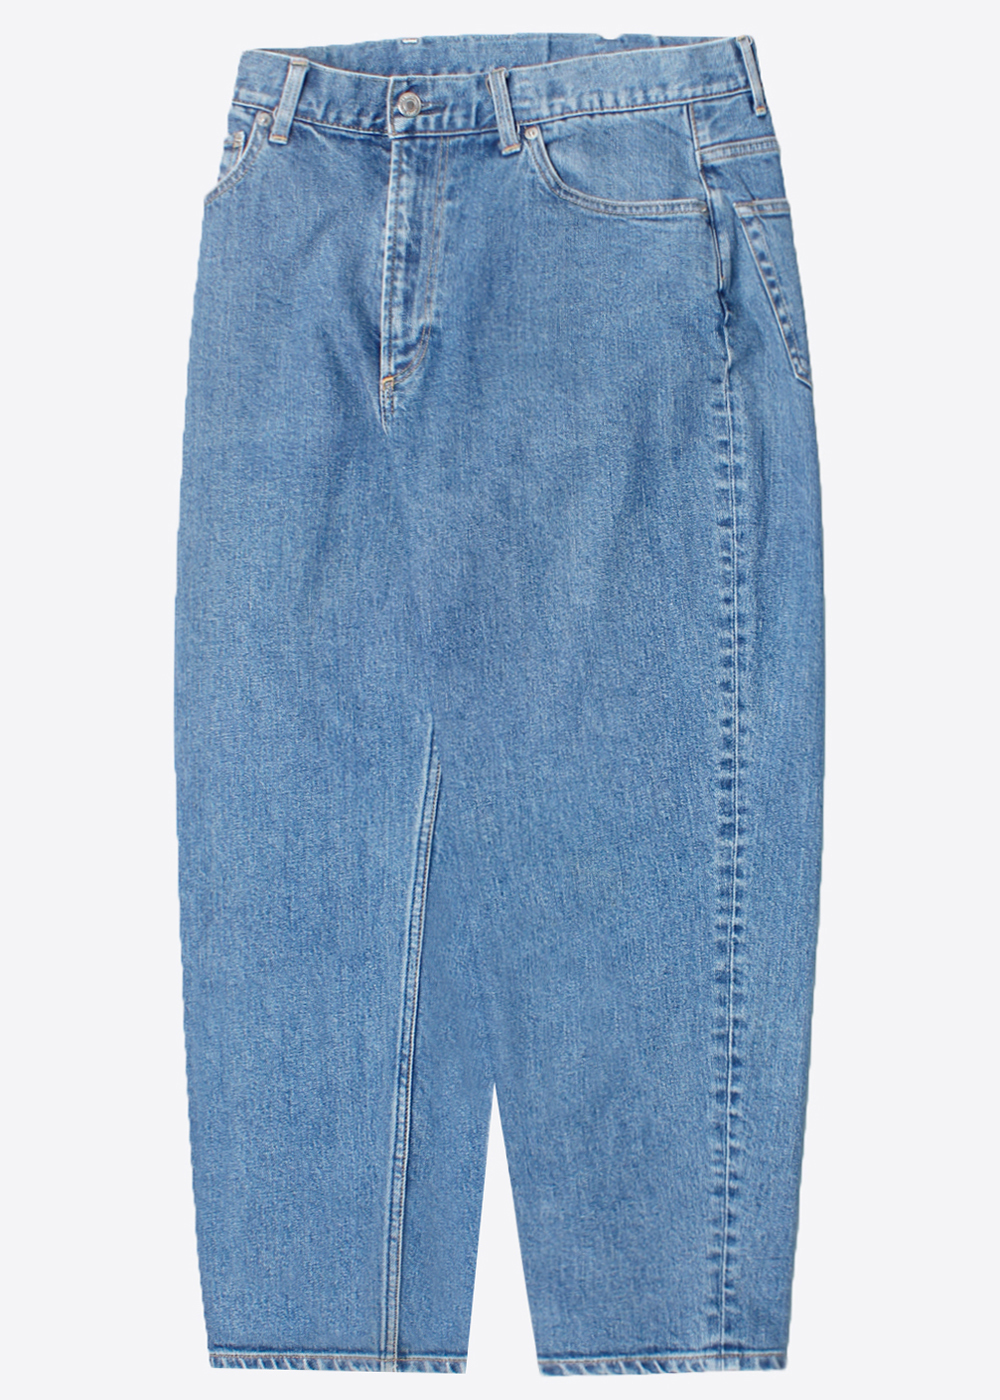 BEAUTY &amp; YOUTH BY UNITED ARROWS’relax fit&#039; denim pant